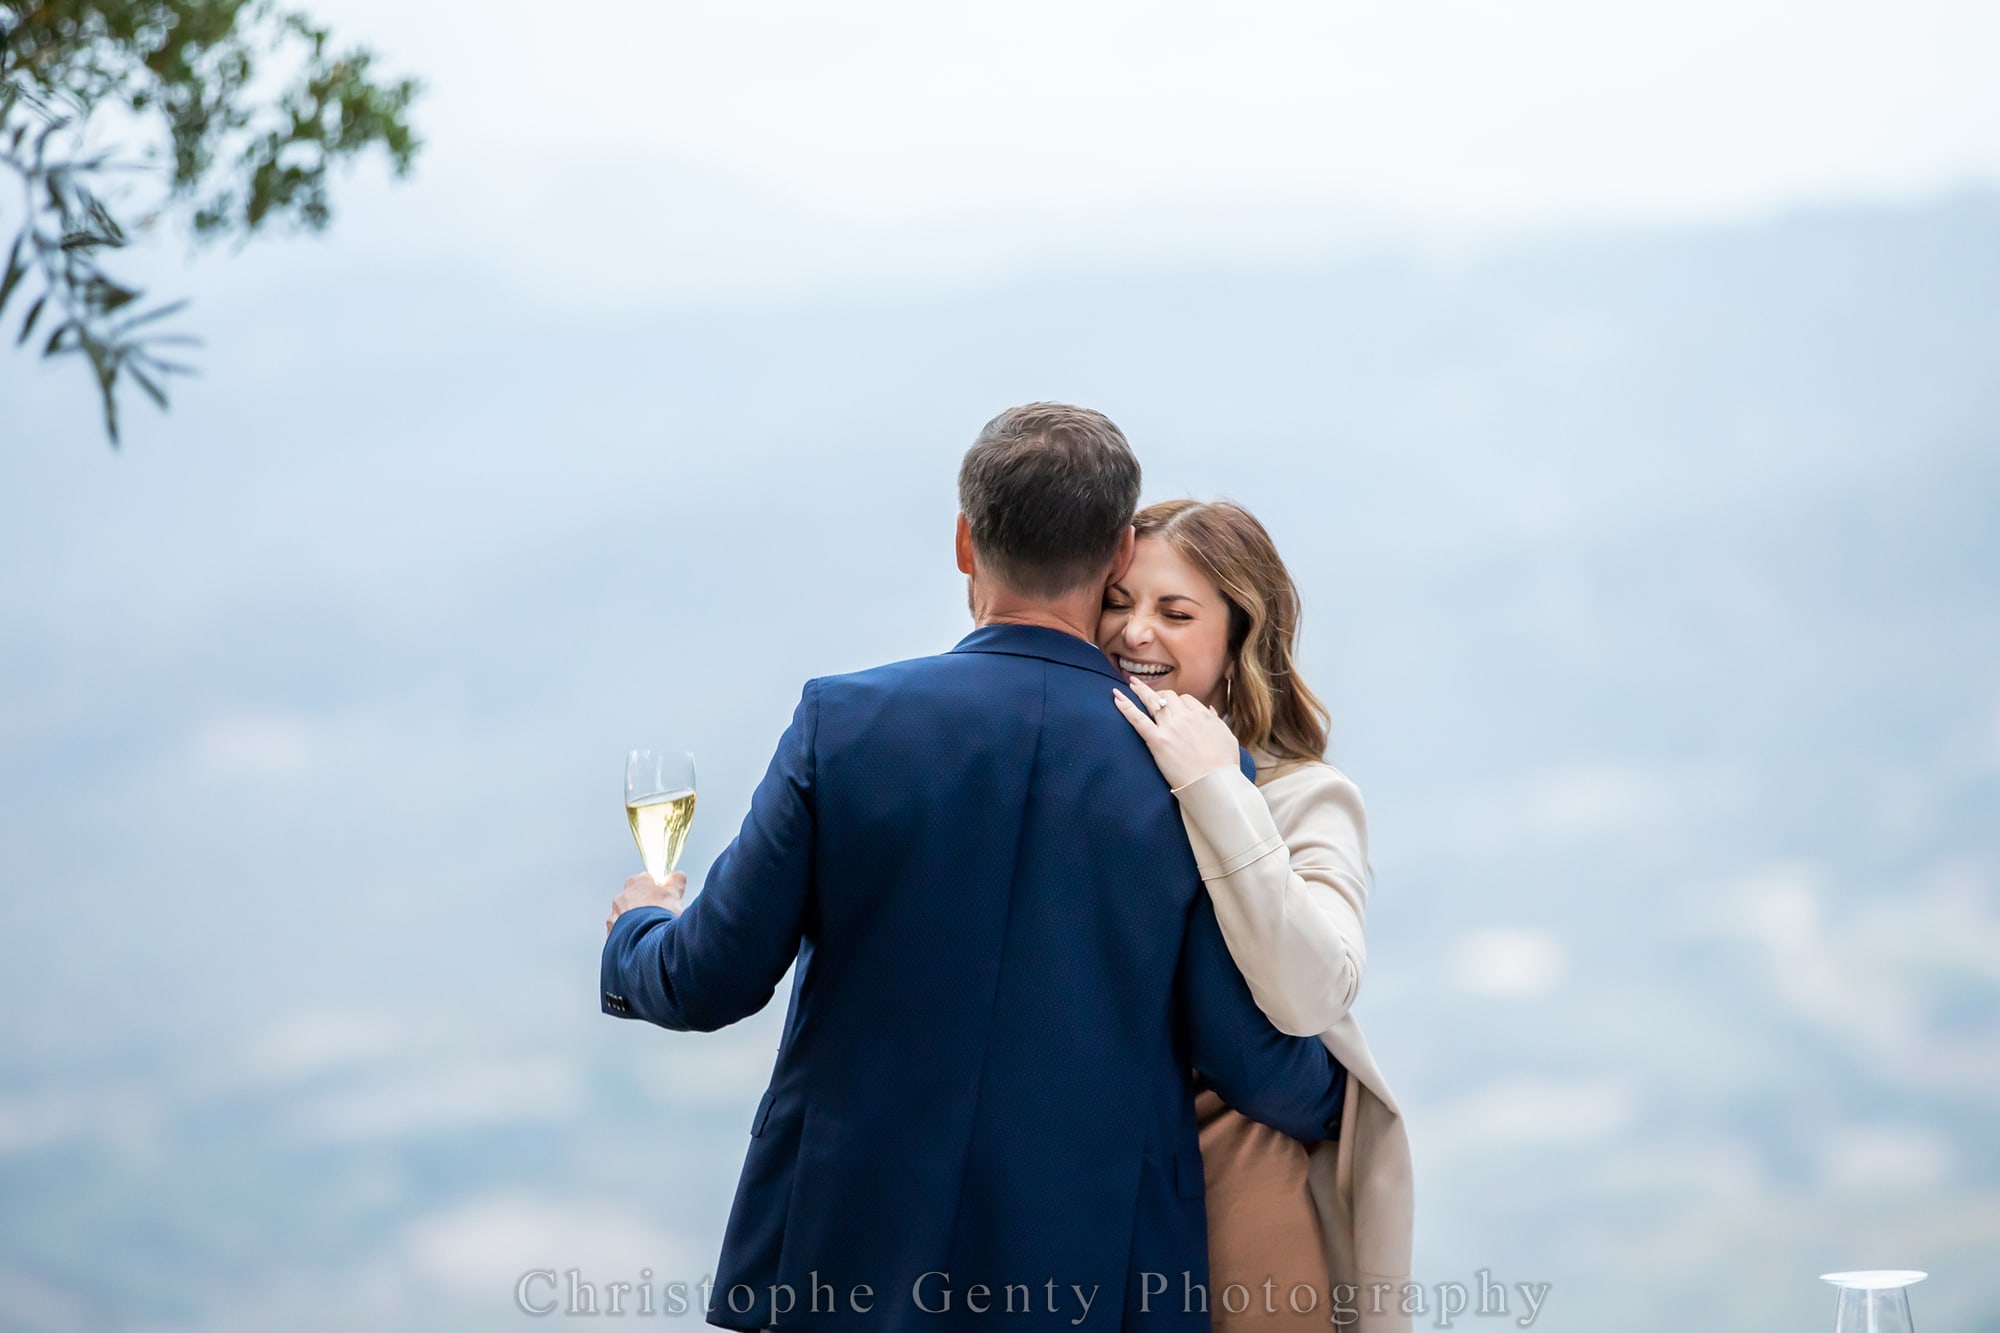 Best Wineries to propose in the Napa Valley - Private Winery in Napa